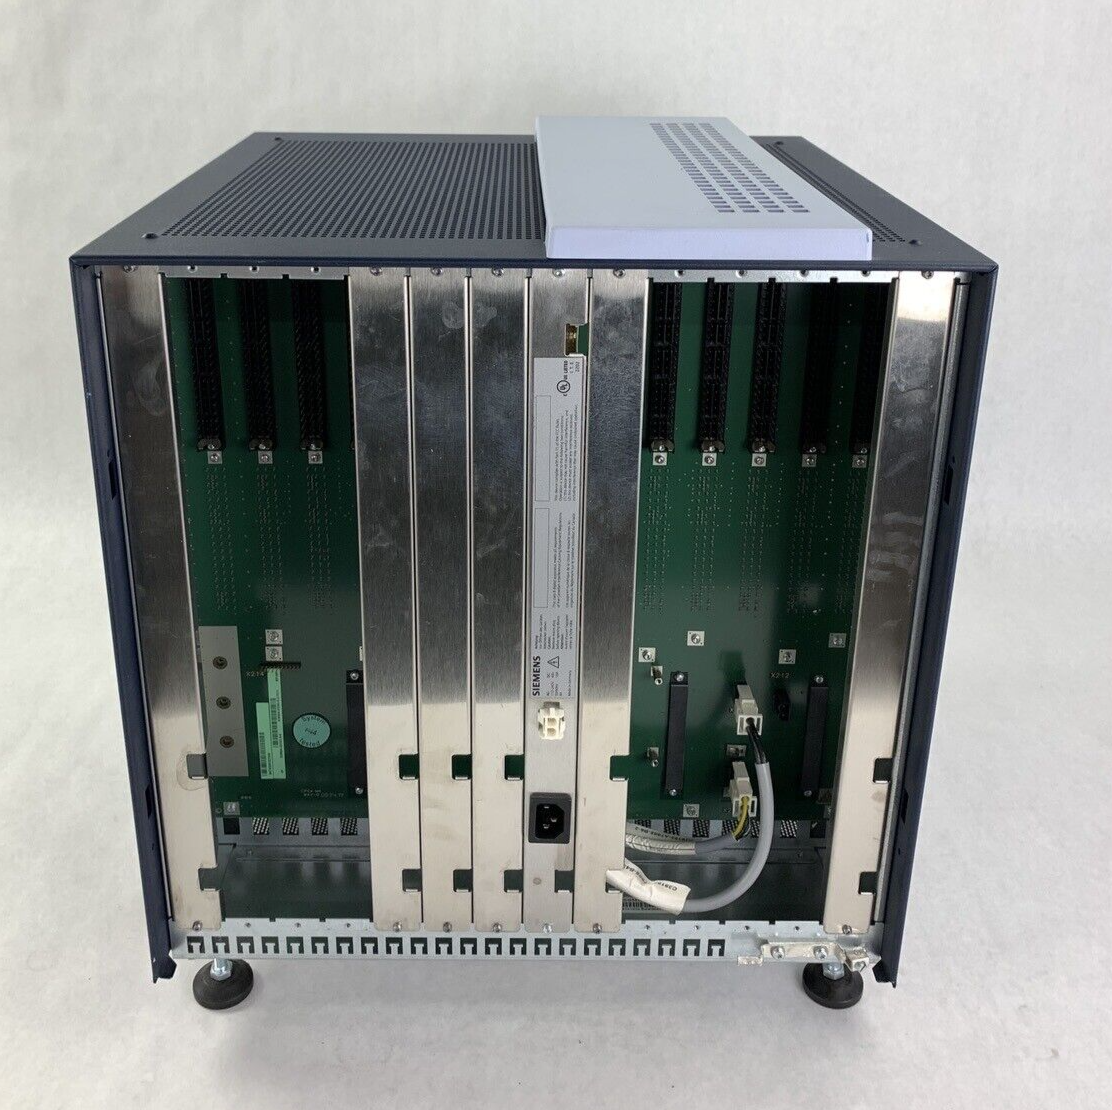 Siemens AP 3700 Communication Server Expansion Chassis